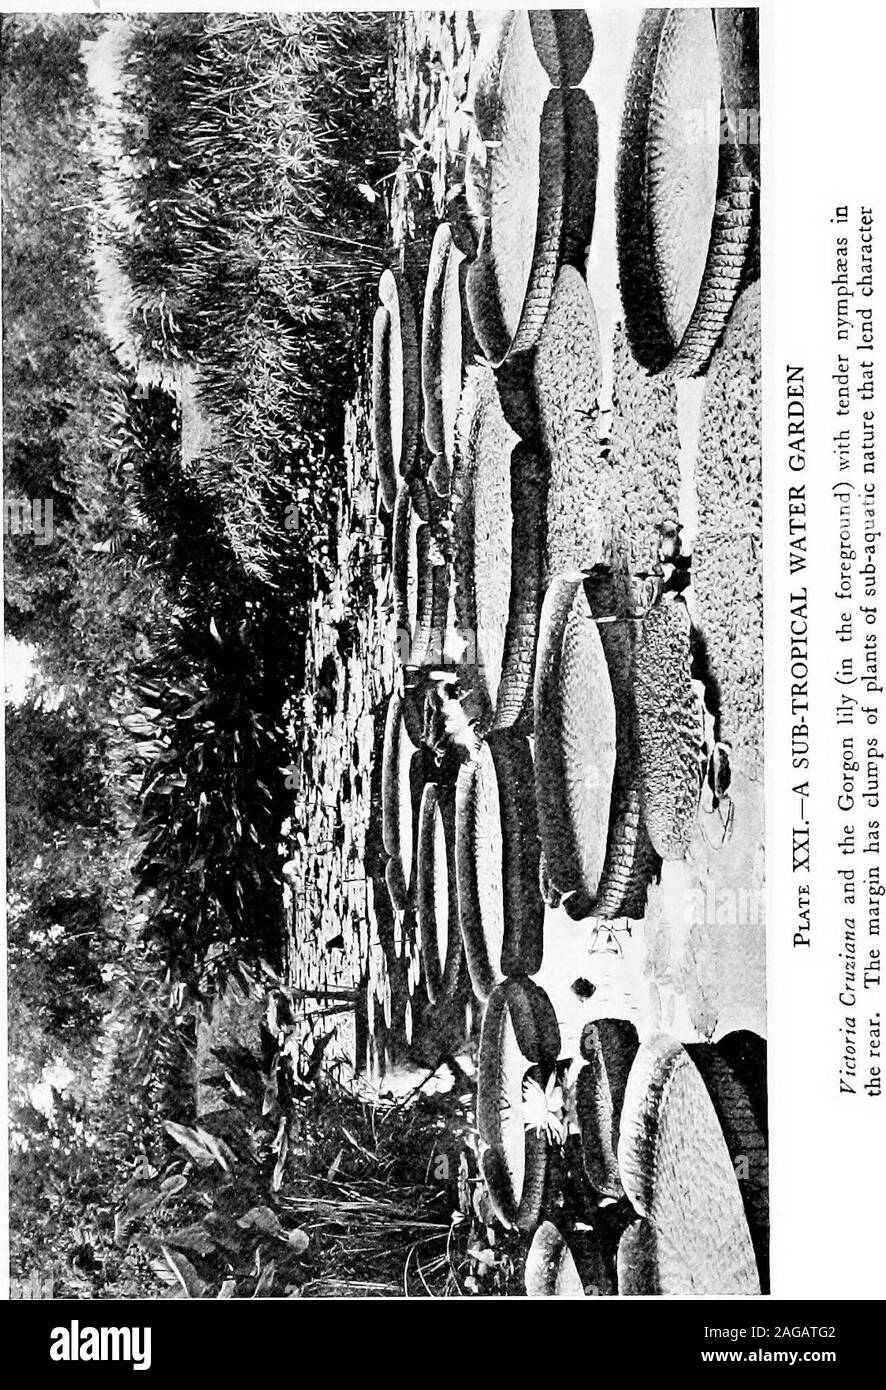 . Water-lilies and how to grow them, with chapters on the proper making of ponds and the use of accessory plants. Plate XX.—THE FLOWER-BUD OF A VICTORIA This one (f. Cruziana) differs from V.regia in being less spinyon the sepals. At the time of opening a delicious fragrance,like pineapples, pervades the air. THE NIGHT BLOOMING WATER-LILIES I3I its flower is the white night lotus {NymphceaLotus). Horticulturally its chief virtue is itsgreat fecundity. Both lotus and dentatabear big balls of seed in great profusion.And their hybrids inherit this character inmore or less completeness. The petal Stock Photo